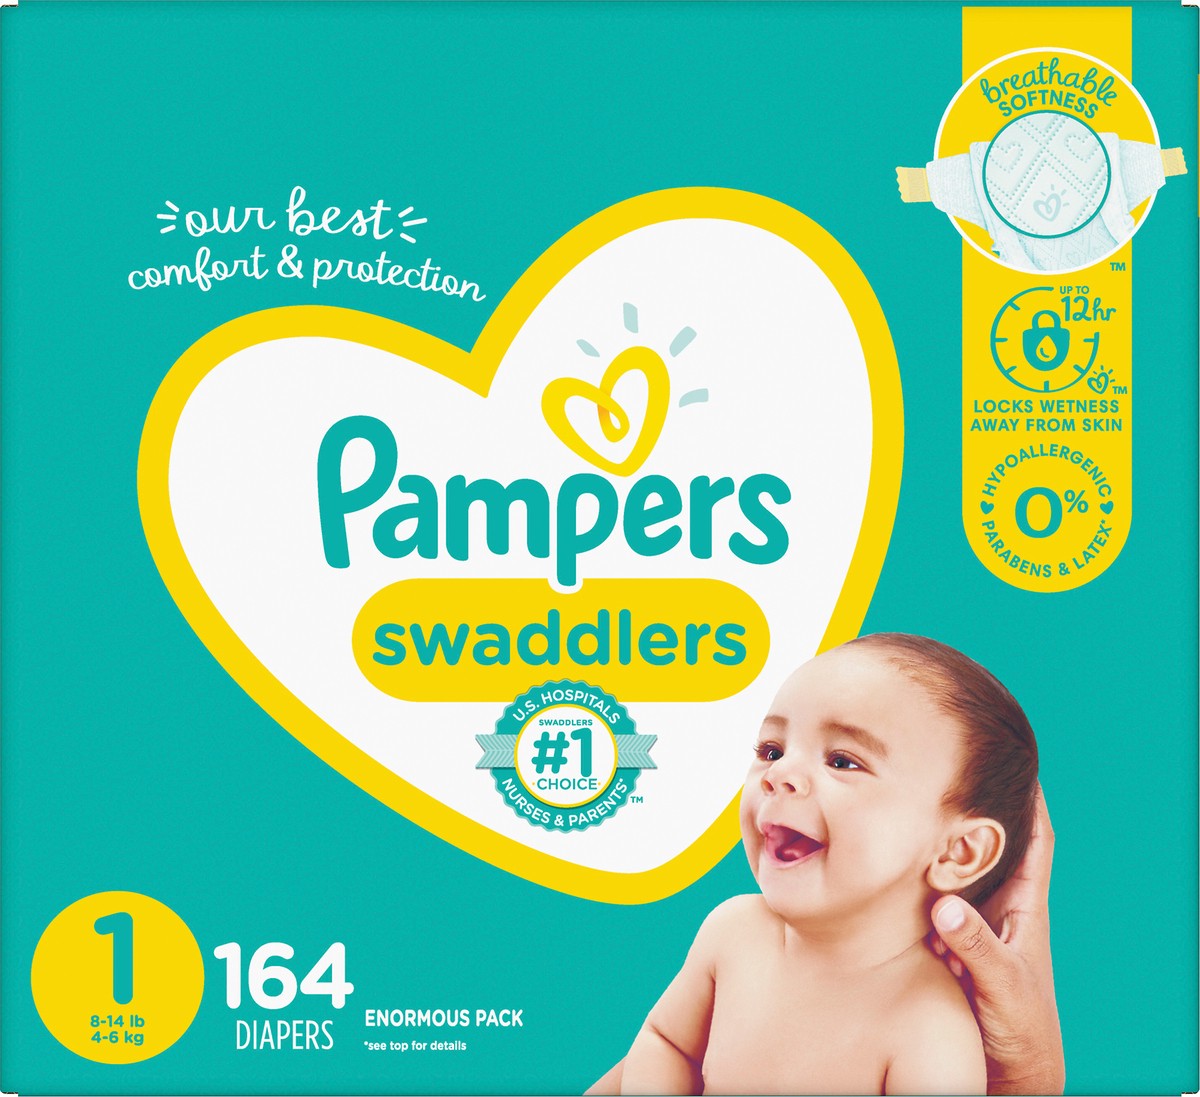 slide 6 of 6, Pampers Swaddlers Enormous Pack 1 (8-14 lb) Diapers 164 ea, 164 ct